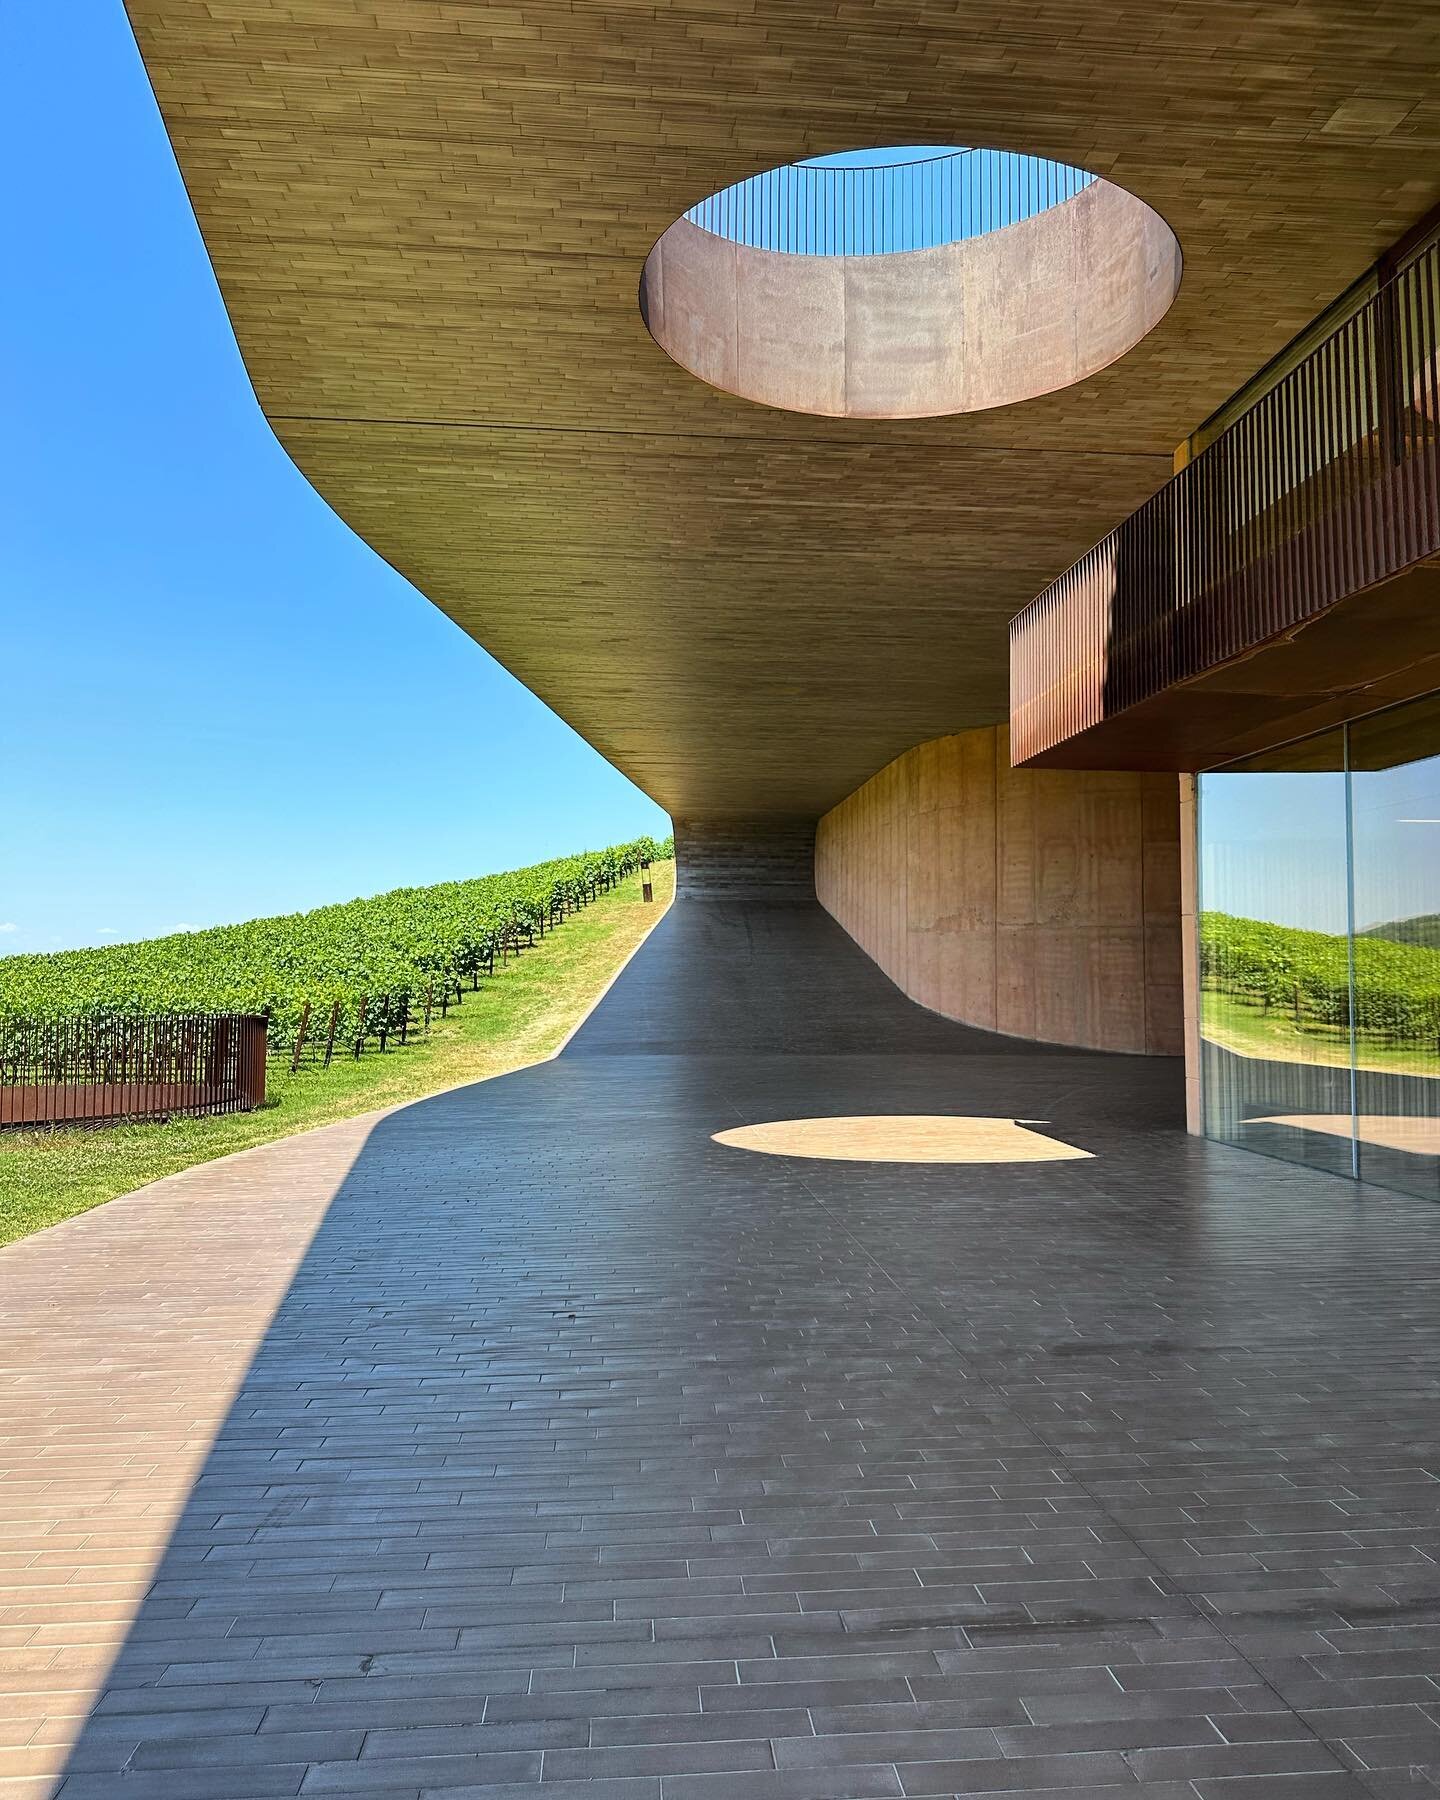 Antinori nel Chianti Classico | Tuscany. Weathering Steel &amp; Terracotta. Two products we supply on this beautiful structure. Cotto Manetti Litos finish. 
Architecture by @archea_associati 
Structure by @aei_progetti 
.
.
#keelarchitectural #terrac